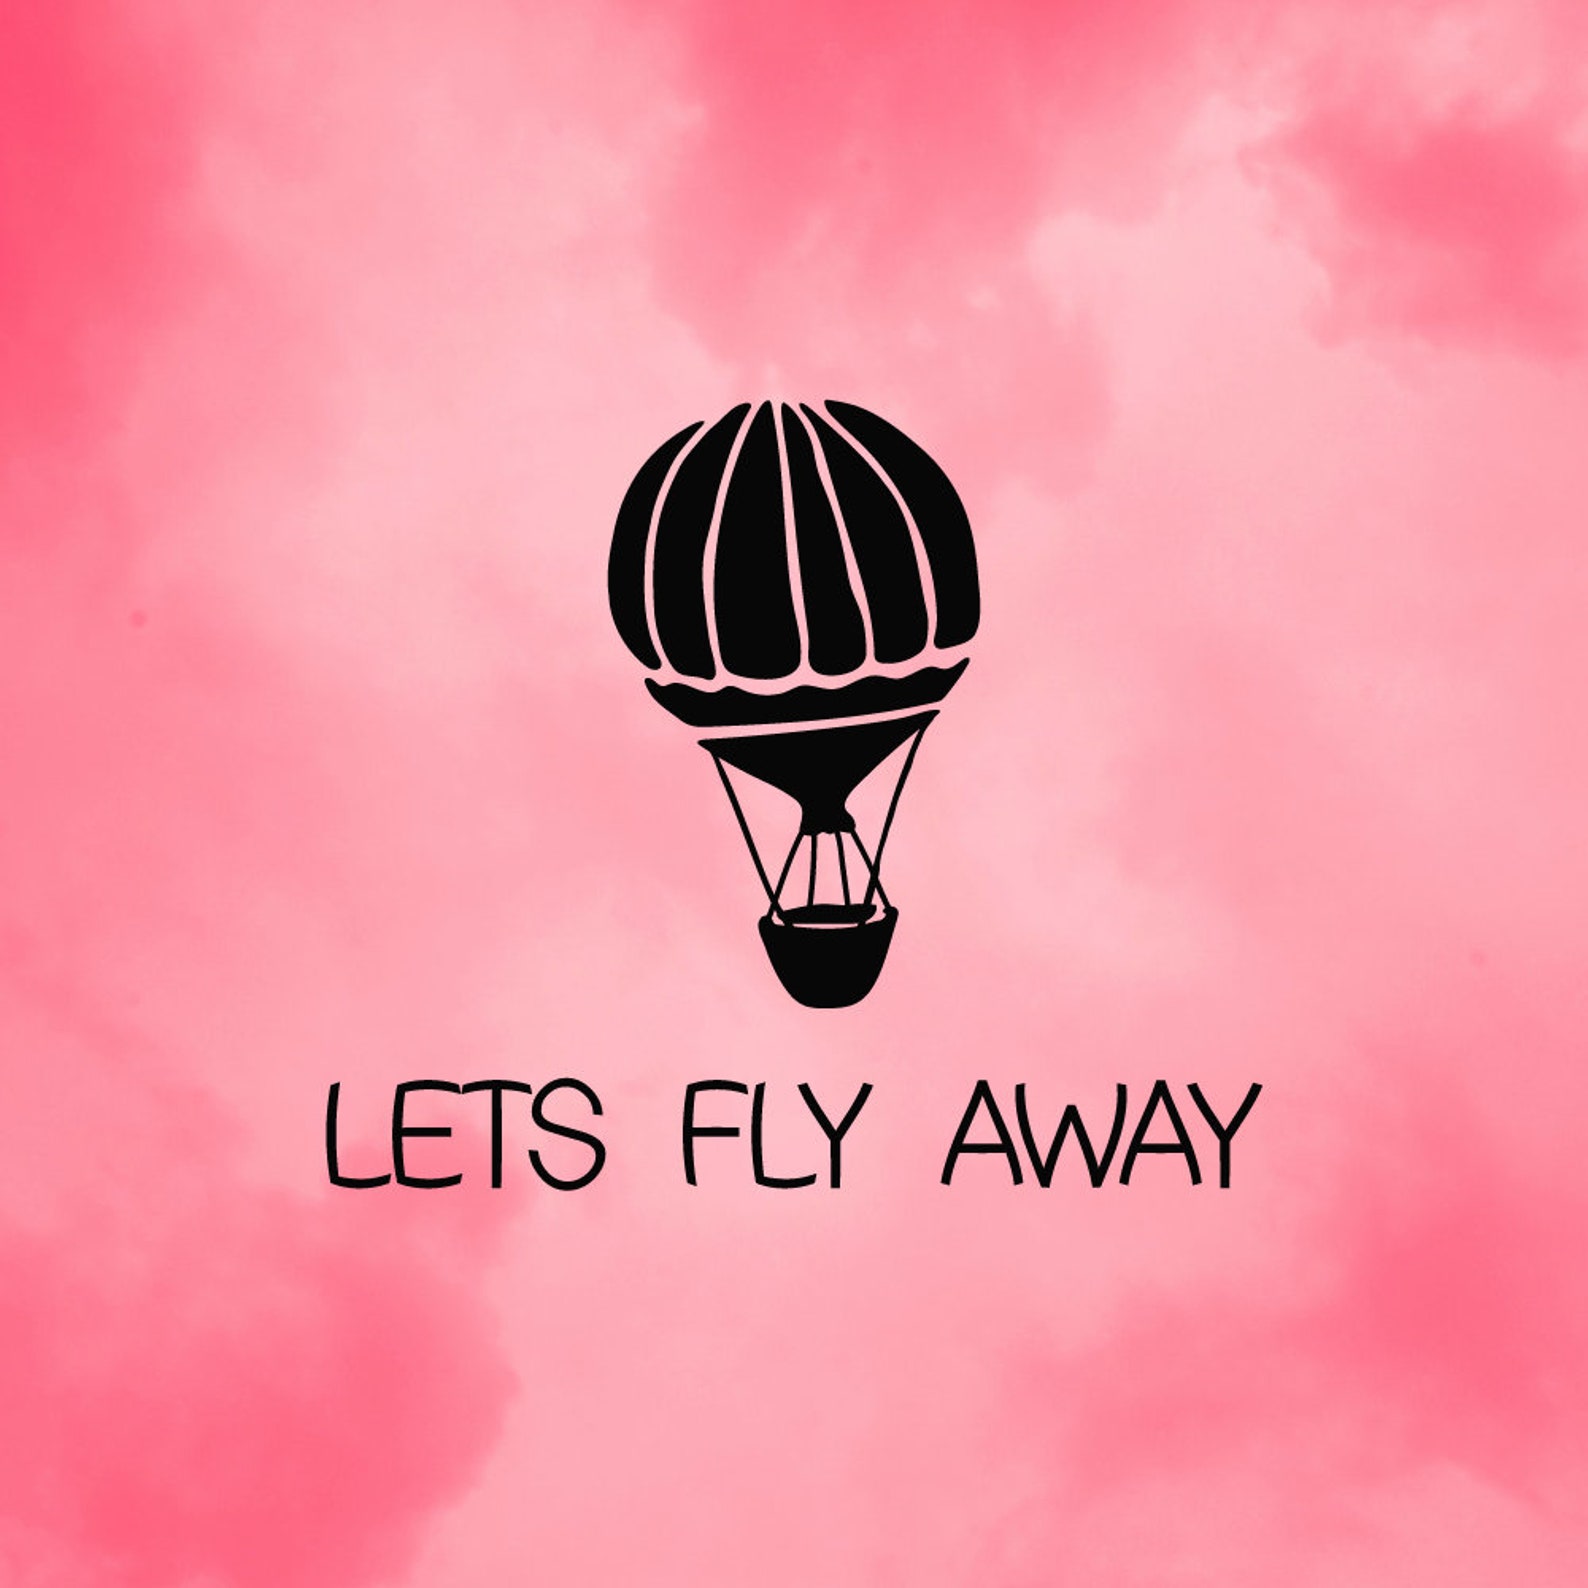 Let it fly. Levo - Let's Fly away. Let's Fly away (Original Mix). Let's Fly надпись. Lets Fly away перевод.